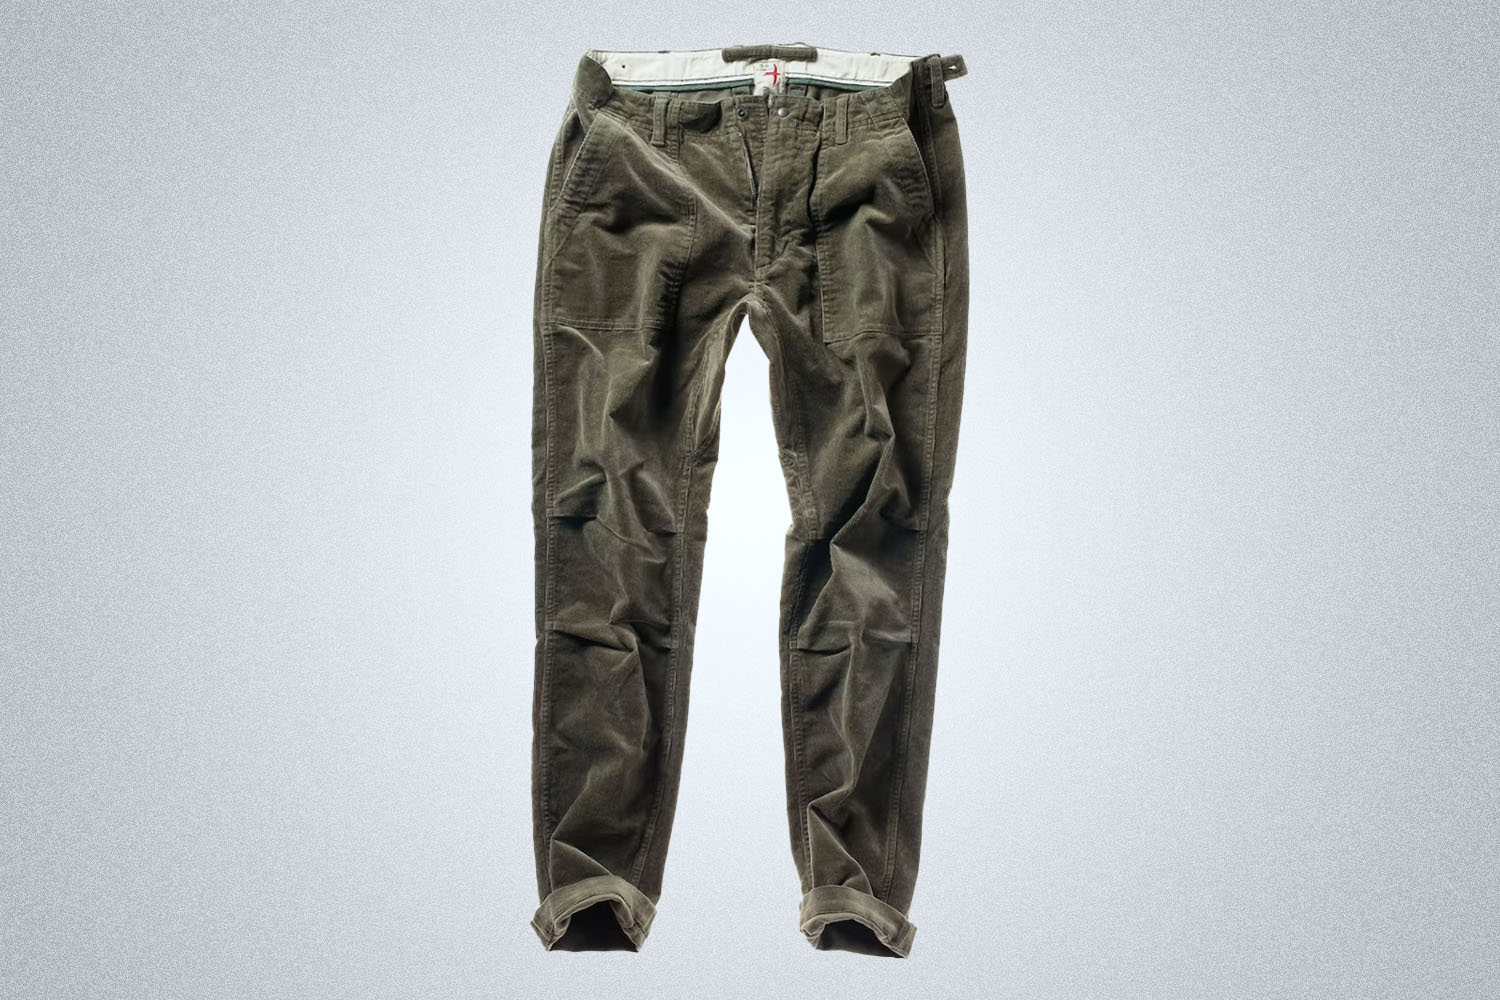 a pair of green Relwen corduroy pants on a grey background